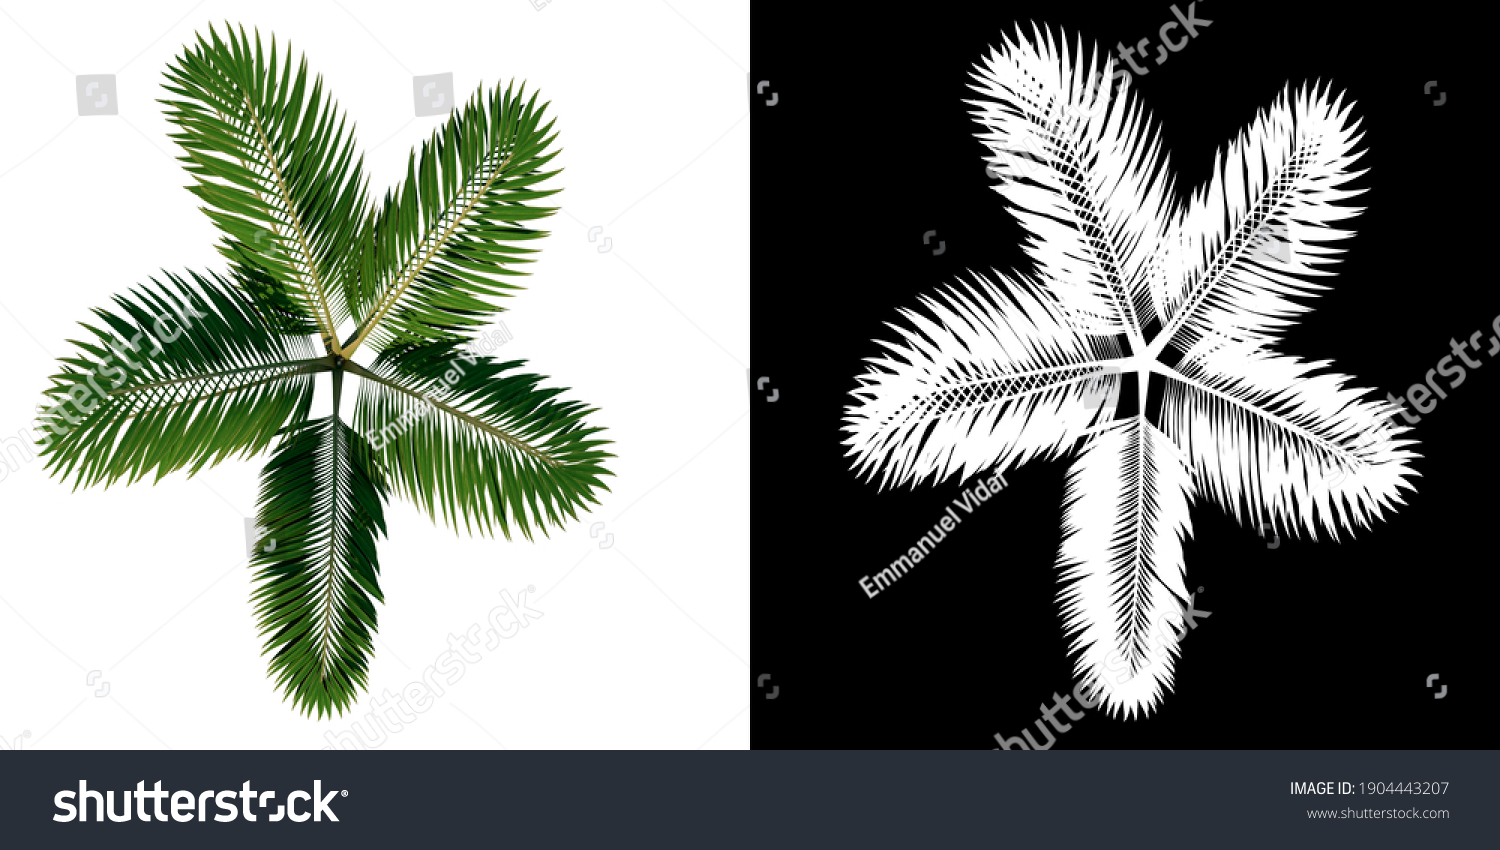 Top View Plant Generic Palm Tree Stock Illustration Shutterstock